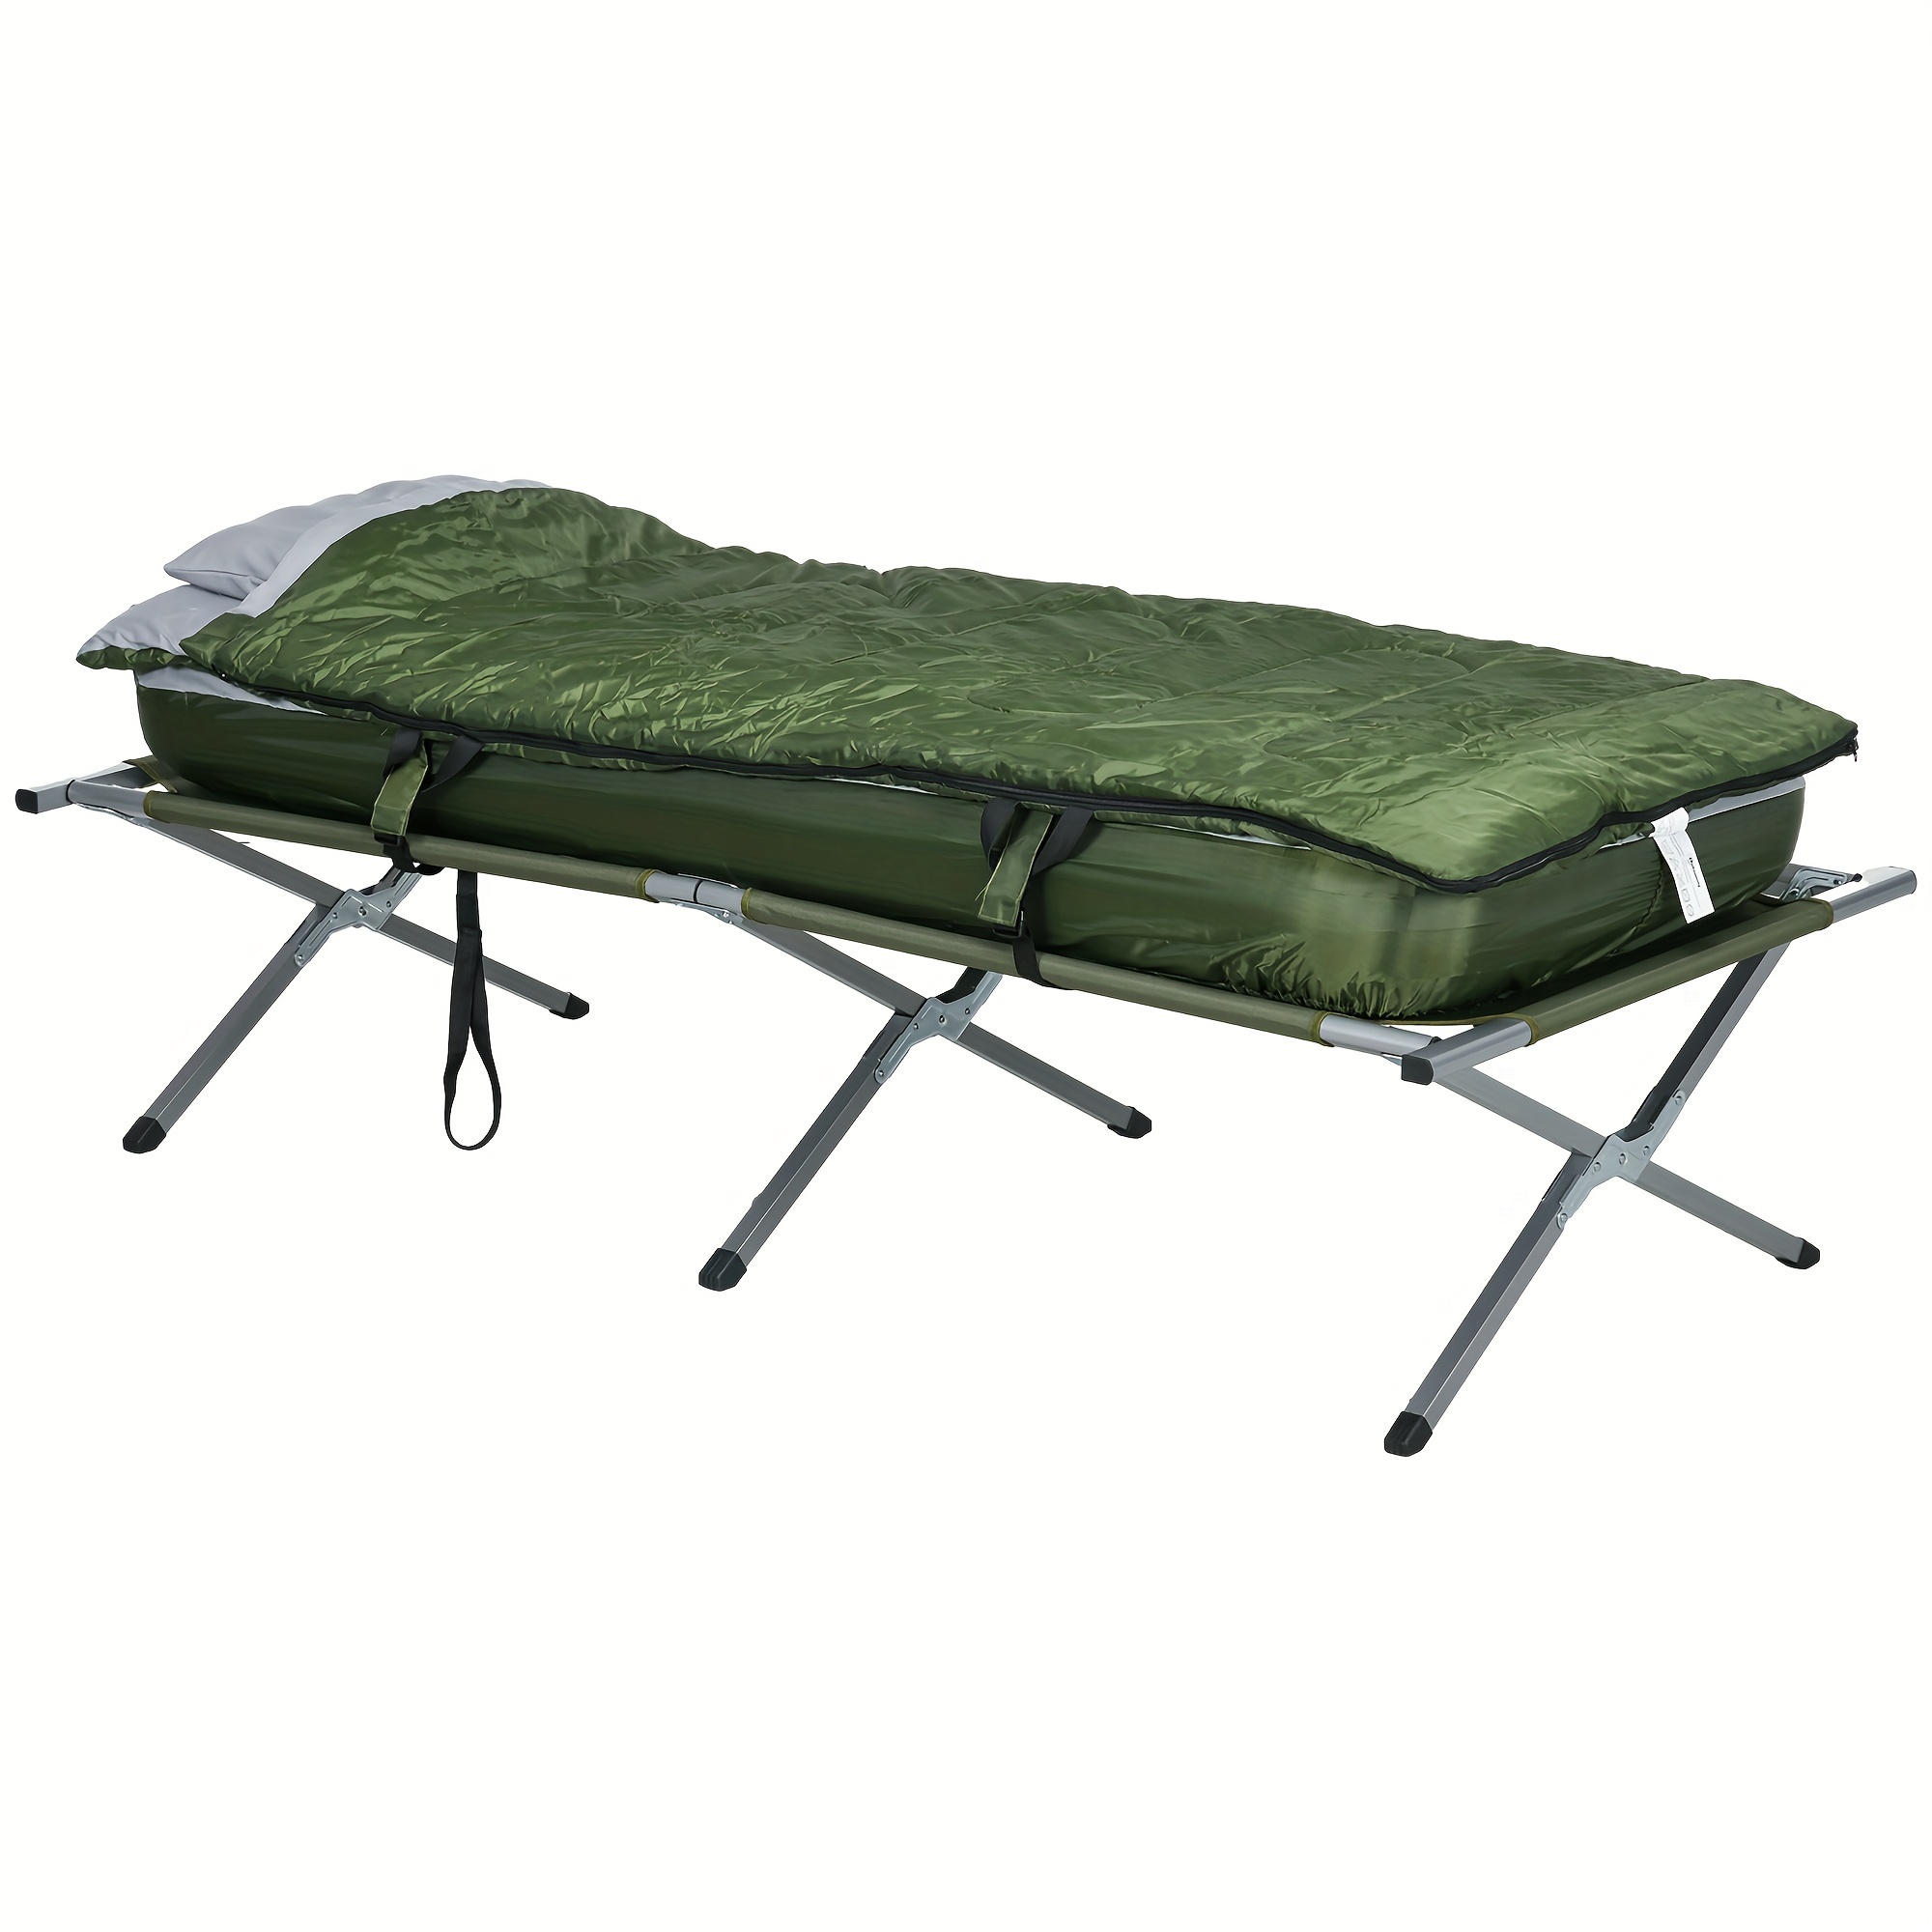 

Outsunny Camping Cot, Outdoor Folding Bed Set With Mattress, Sleeping Bag, Pillow, And Carry Bag, Comfortable And Portable, For Travel Camp Beach